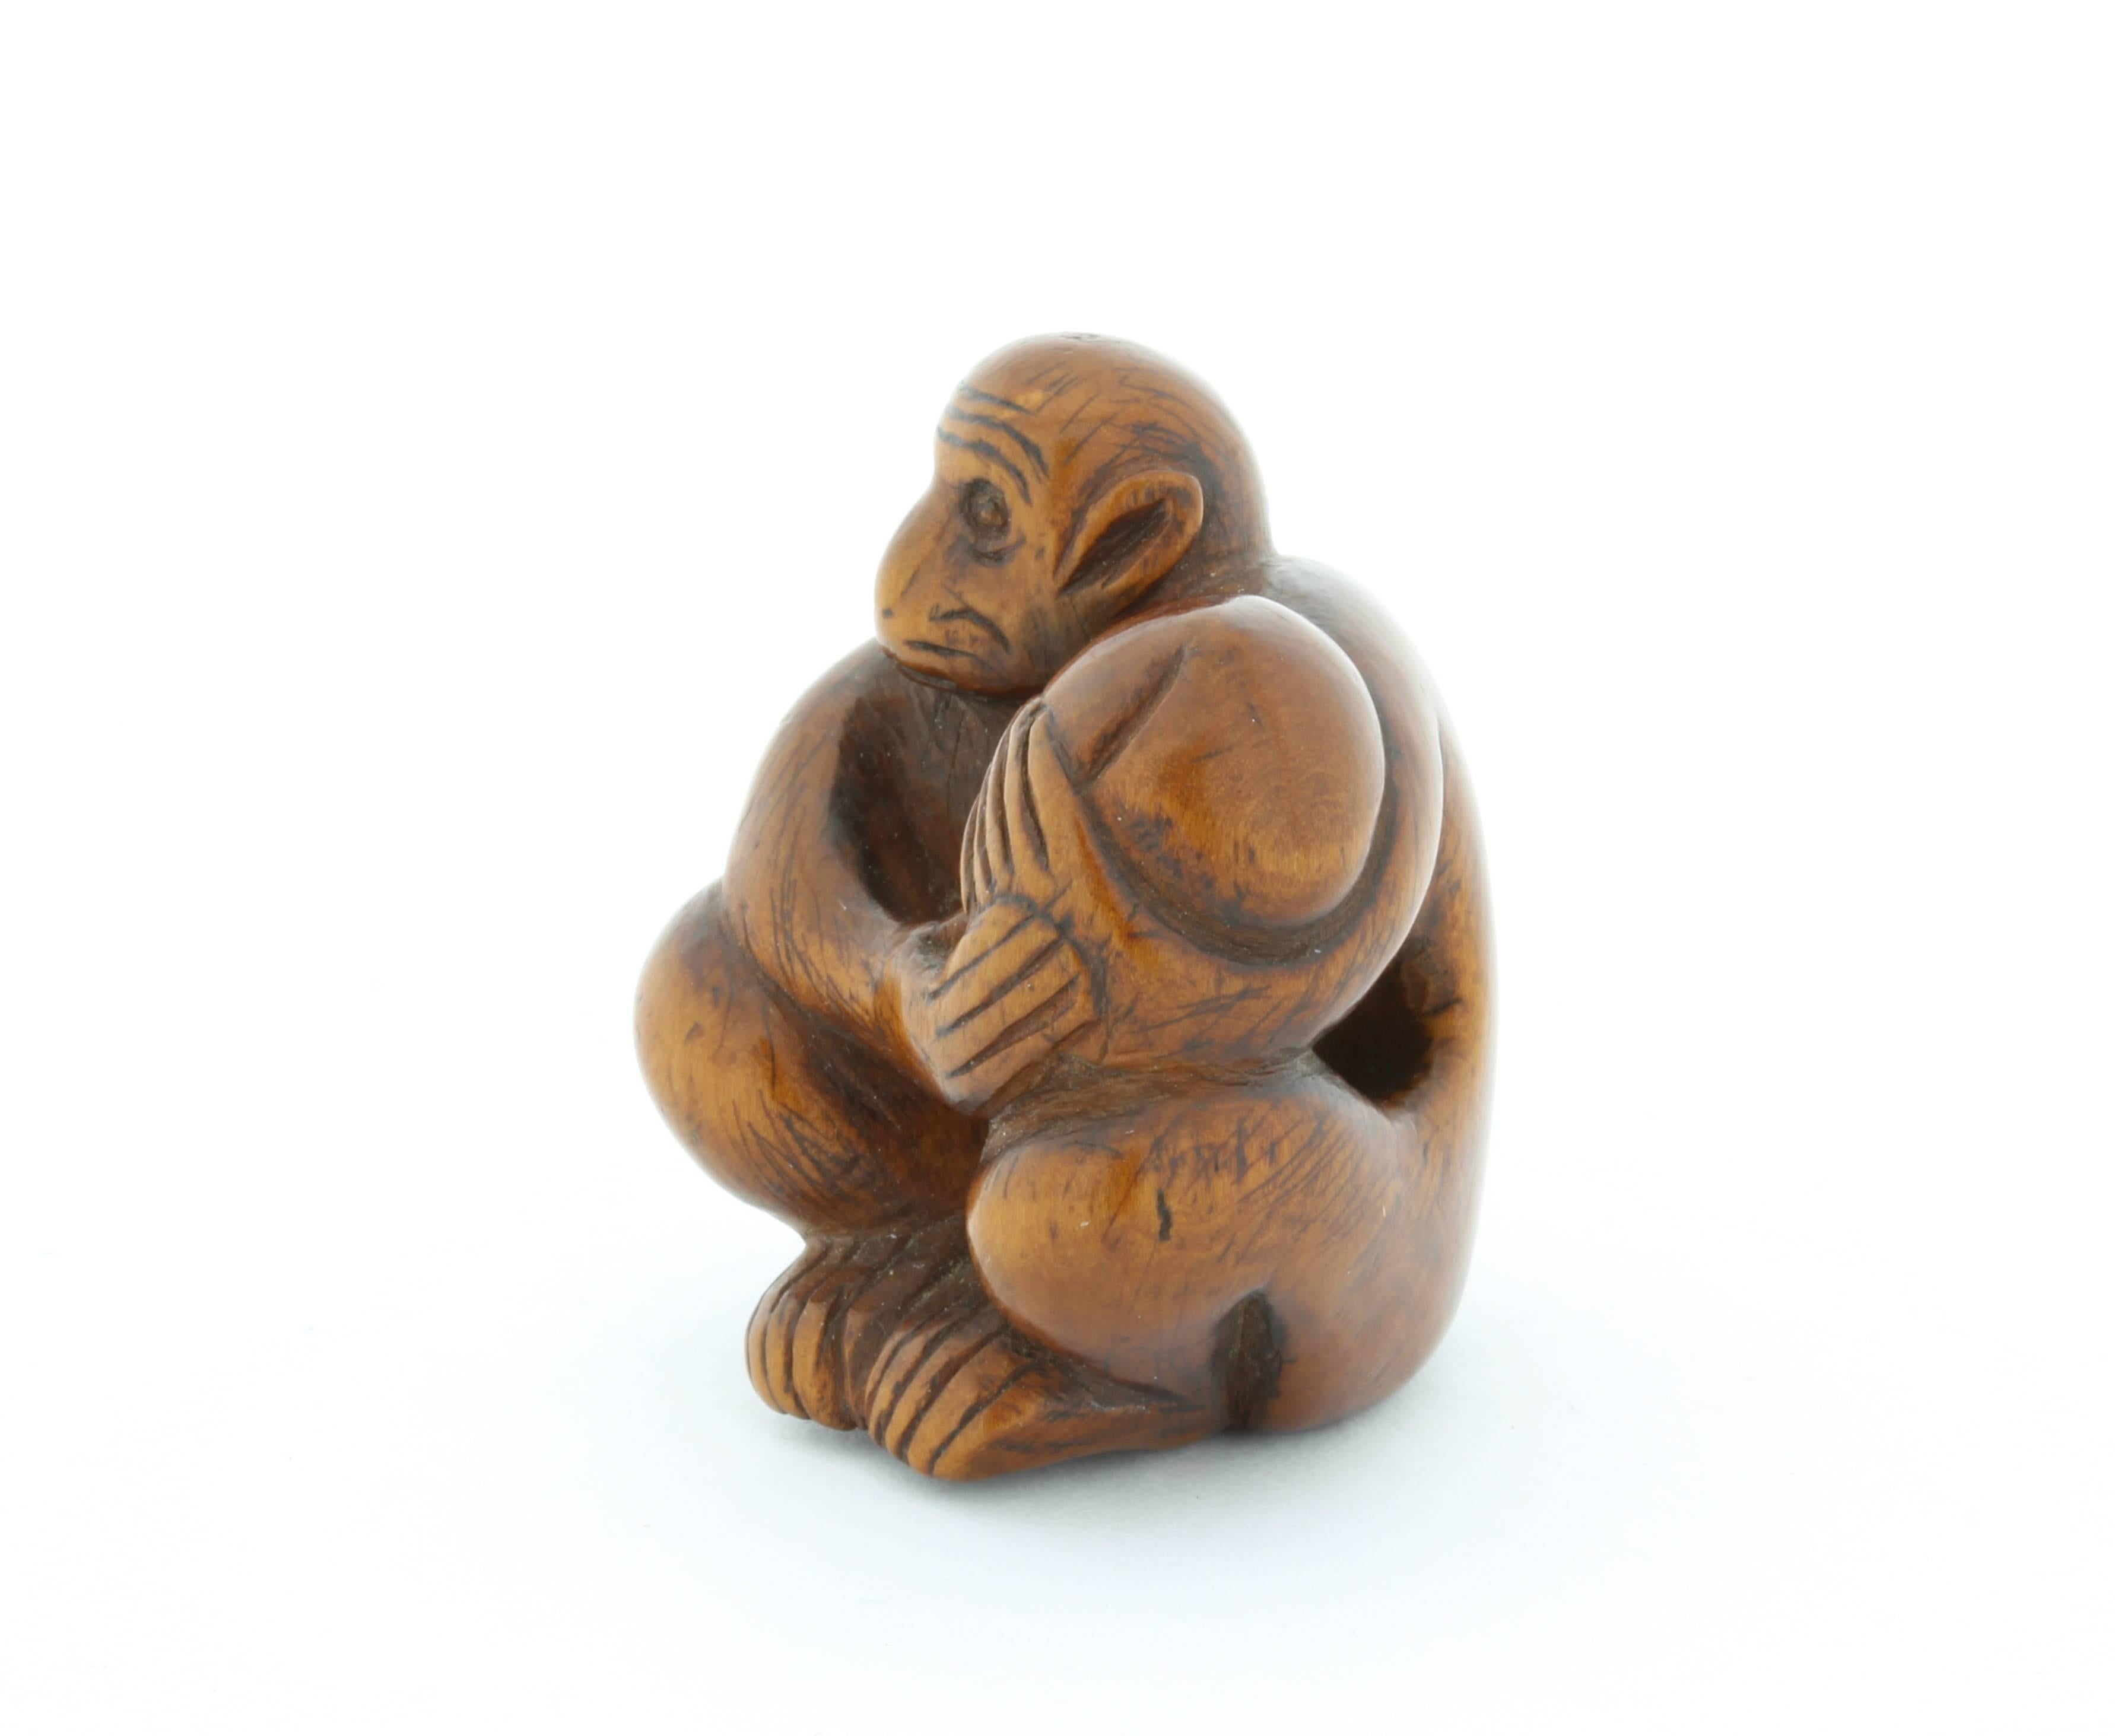 This netsuke is made entirely out of wood and depicts a monkey holding a peach. A peach is a symbol of longevity and it is said to get rid of devil spirit. Unusually for a netsuke there is only one hole at the bottom and supported hole on one side,